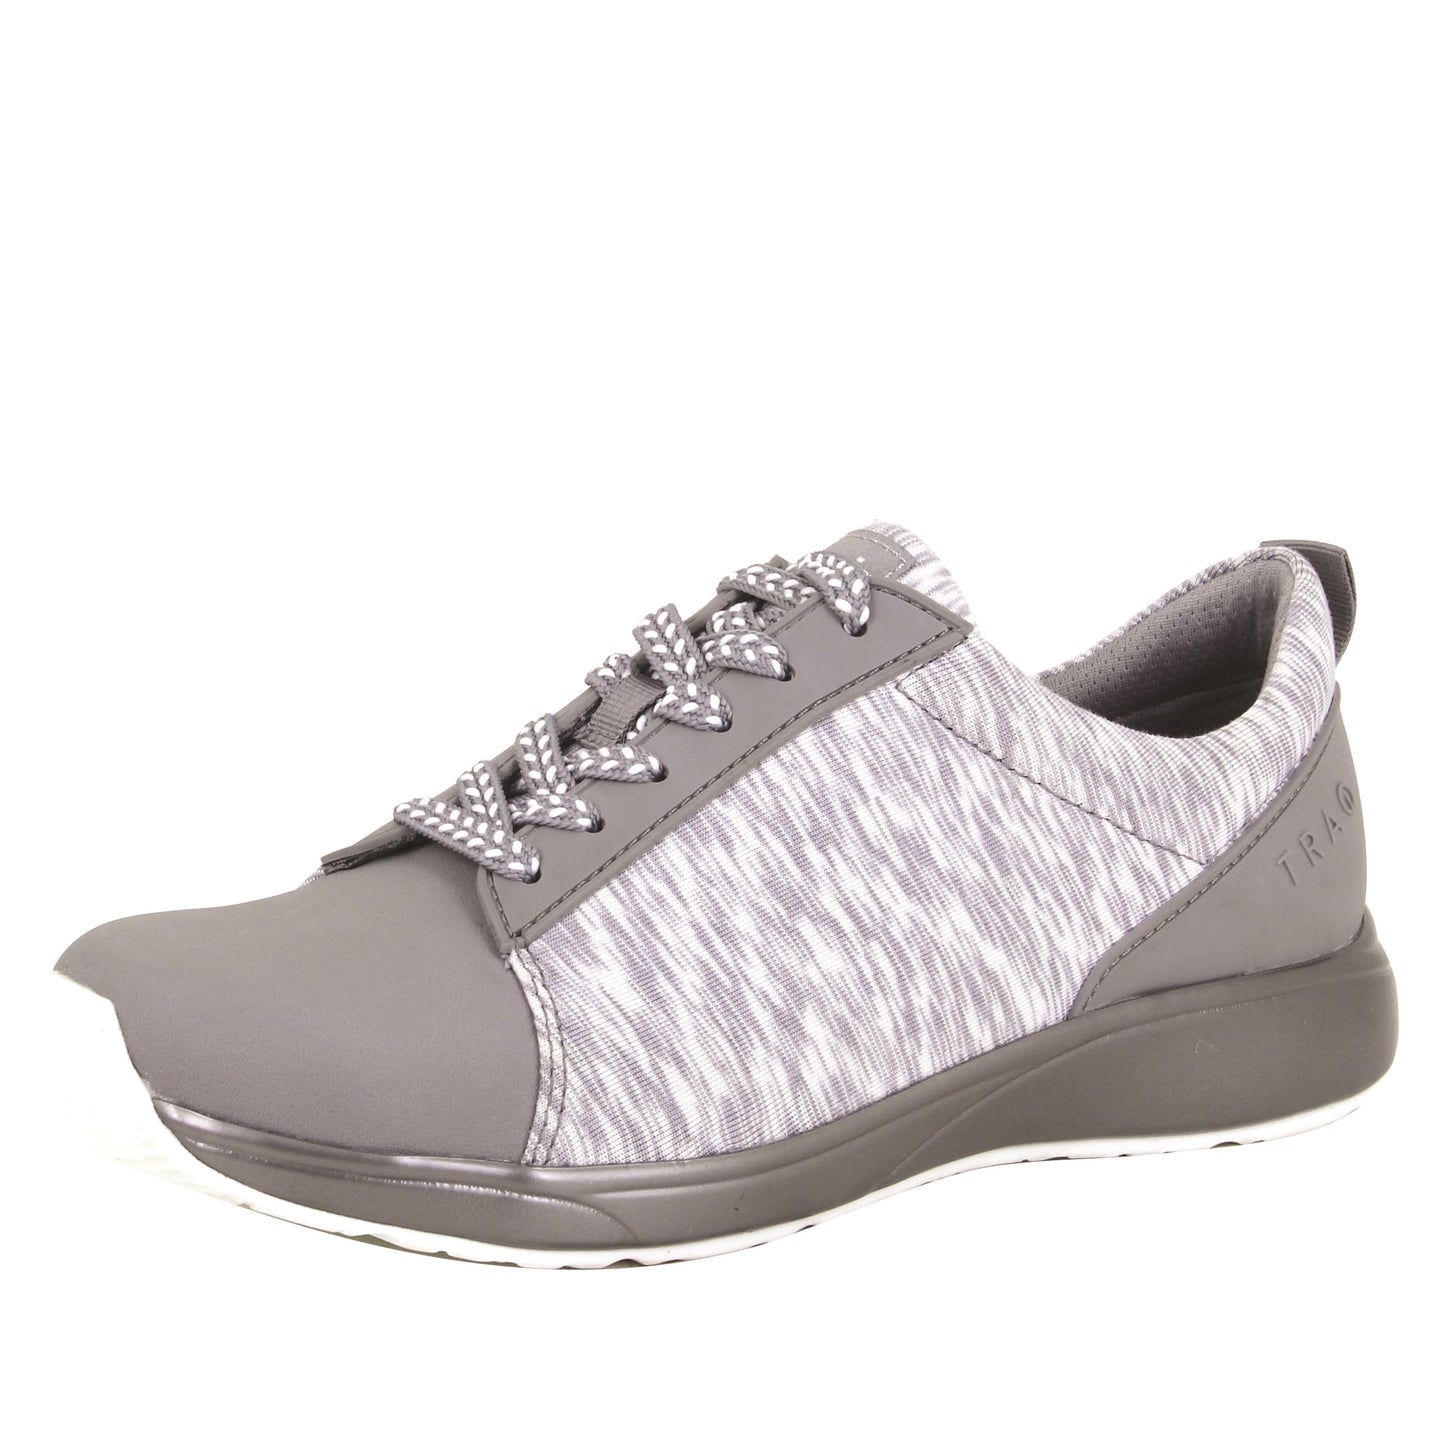 Traq Qest by Alegria in Grey at Parker's Clothing and Shoes.